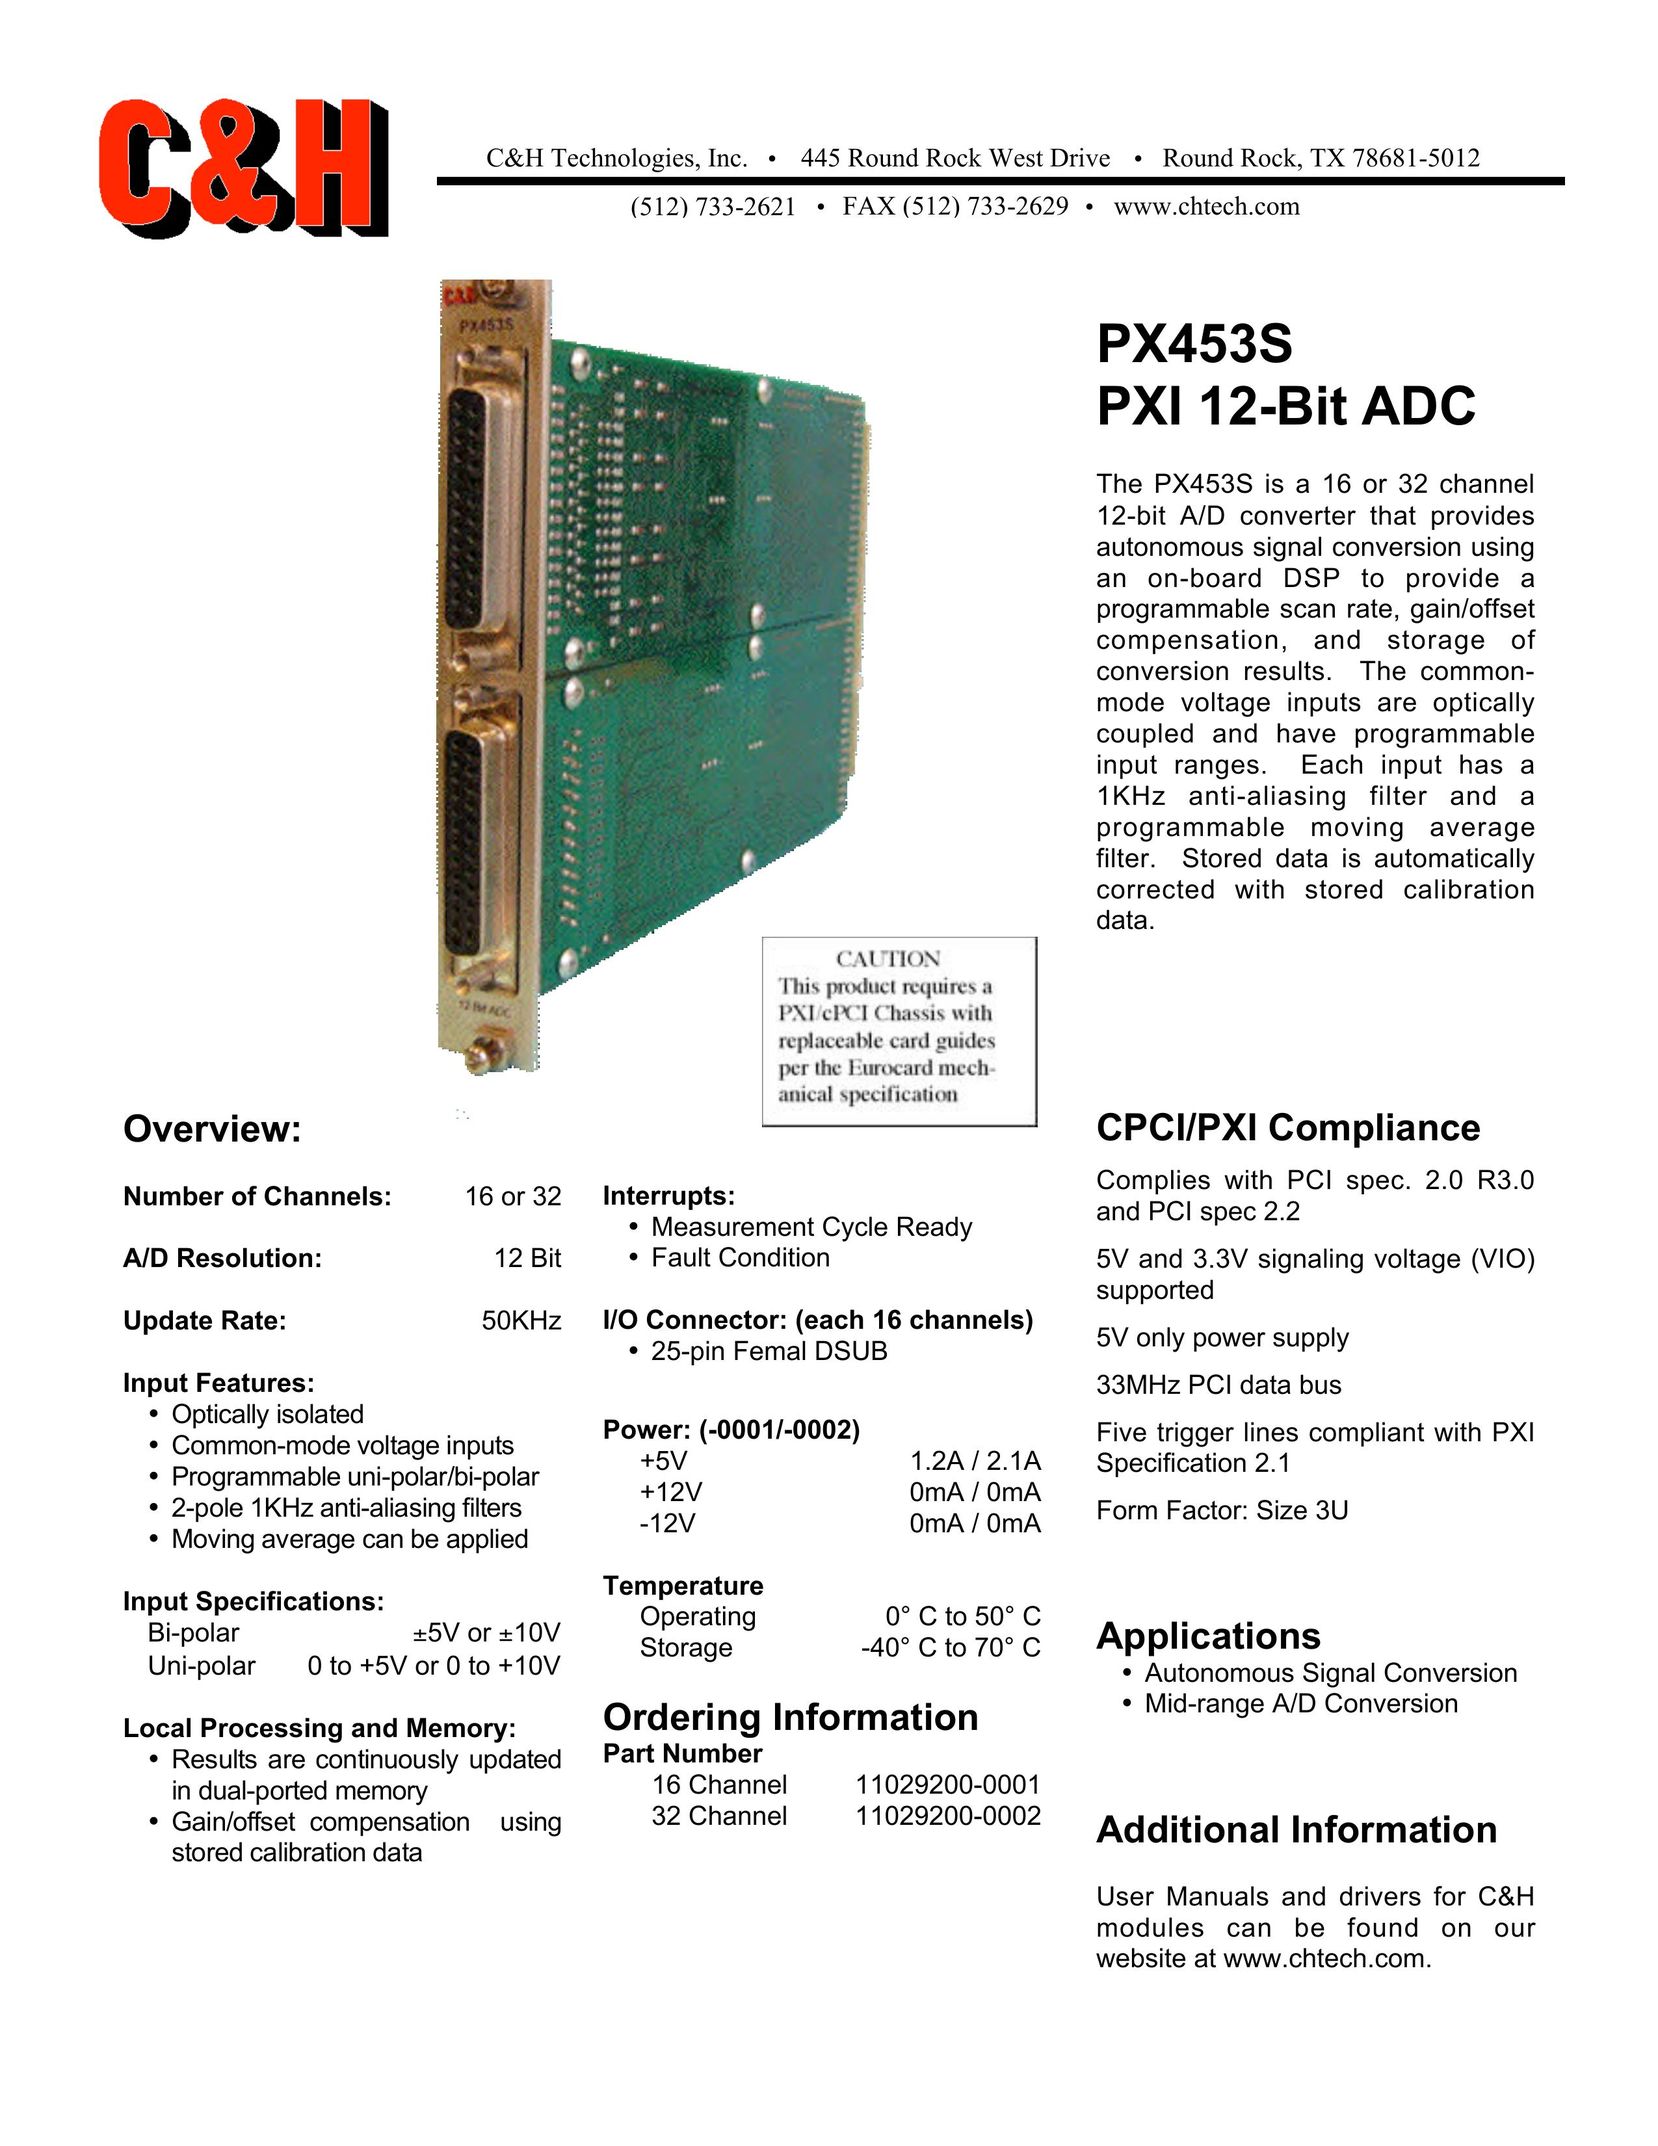 CH Tech PX453S Network Card User Manual